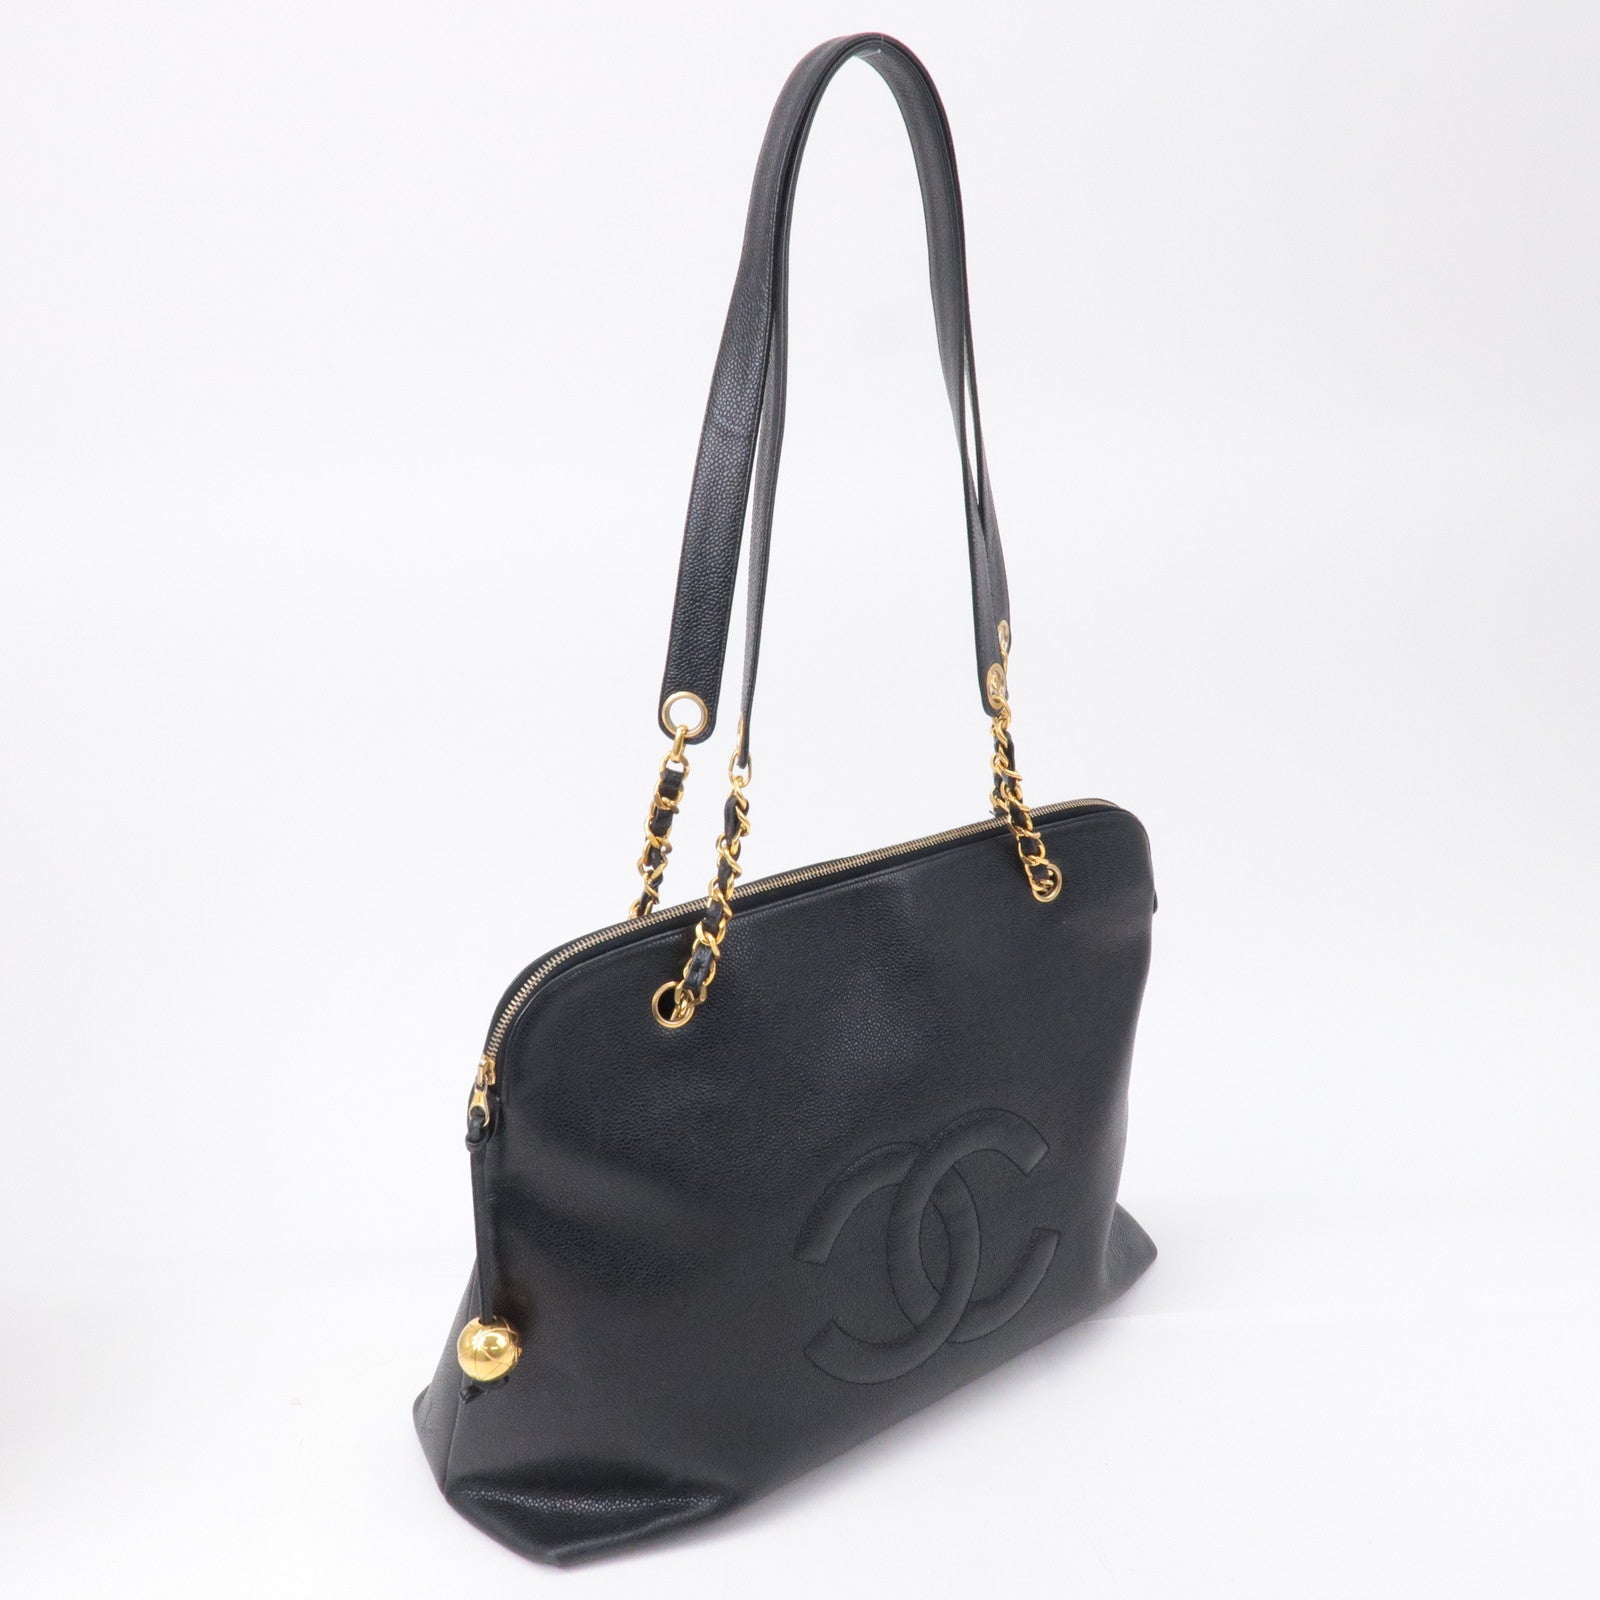 Auth Chanel GST Bag Black Caviar With Gold tone Hardware bag  1K030070n"